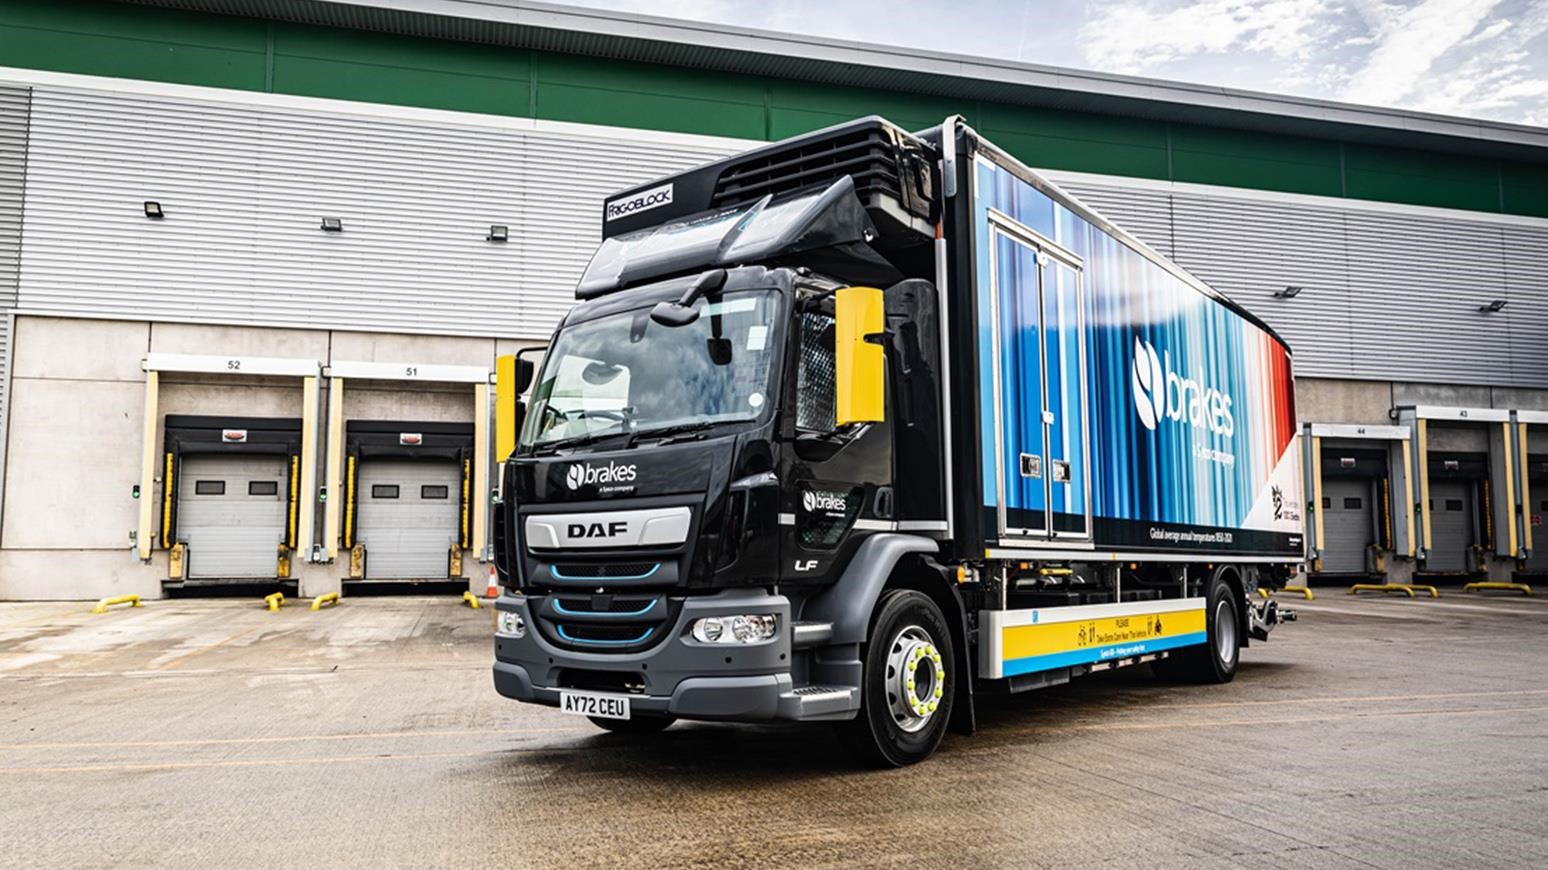 Leading Foodservice Supplier Makes A Climate Statement With Daf LF Electric